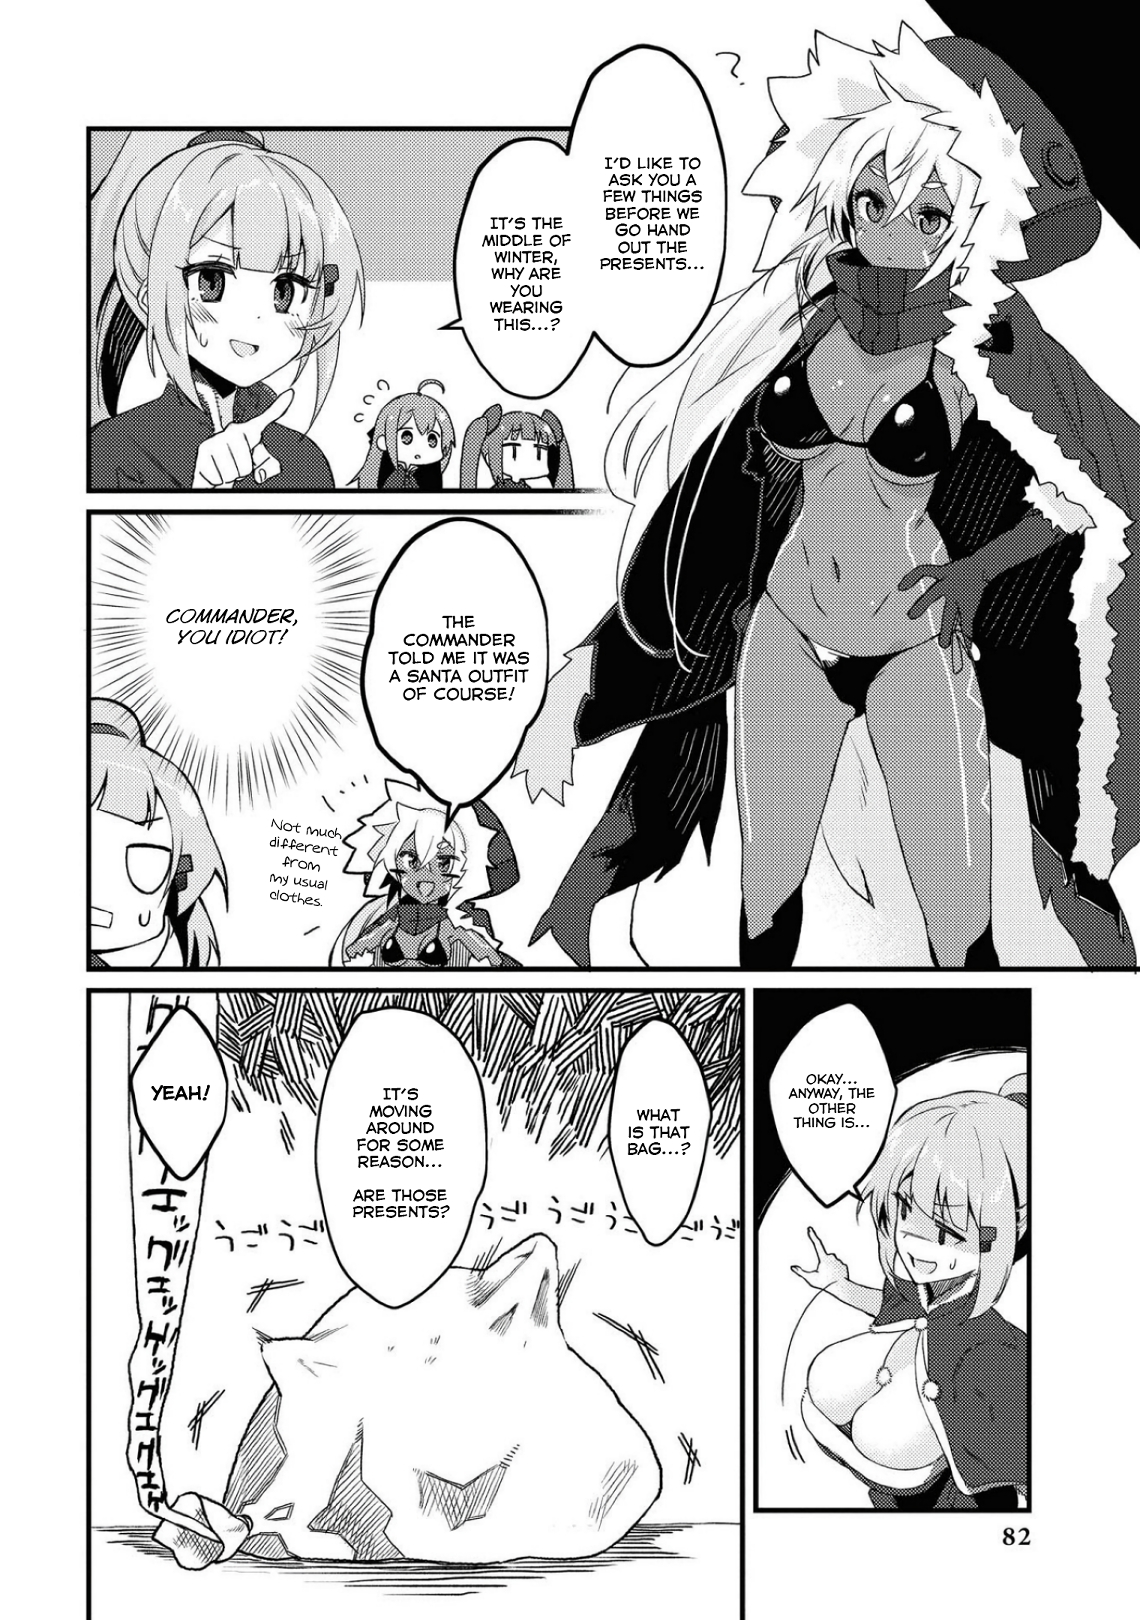 Azur Lane Comic Anthology Breaking!! 35 How To Choose A Christmas Present